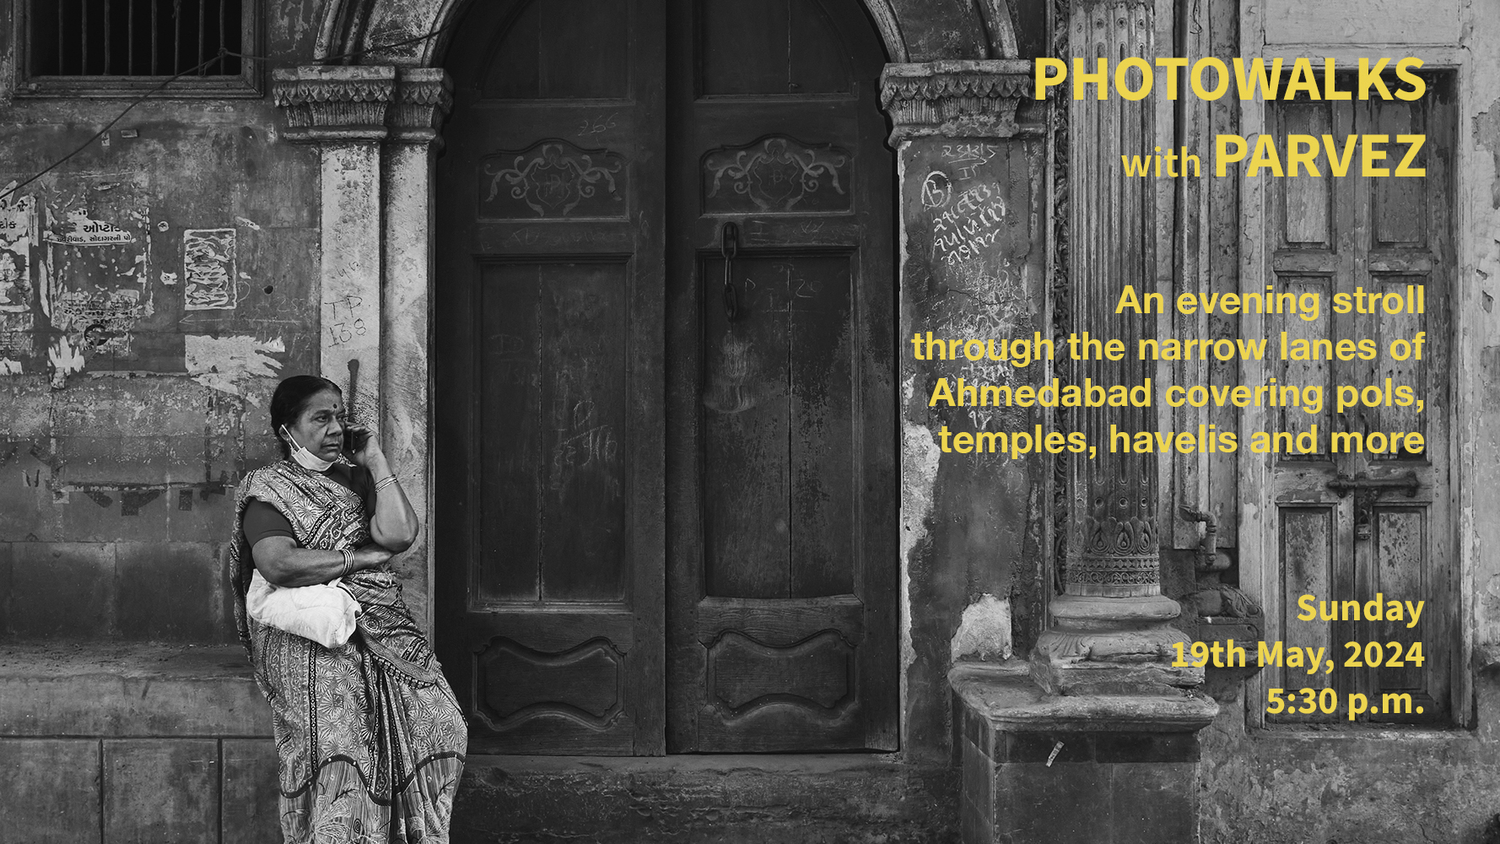 An evening stoll through the heritage city of Ahmedabad photo walk